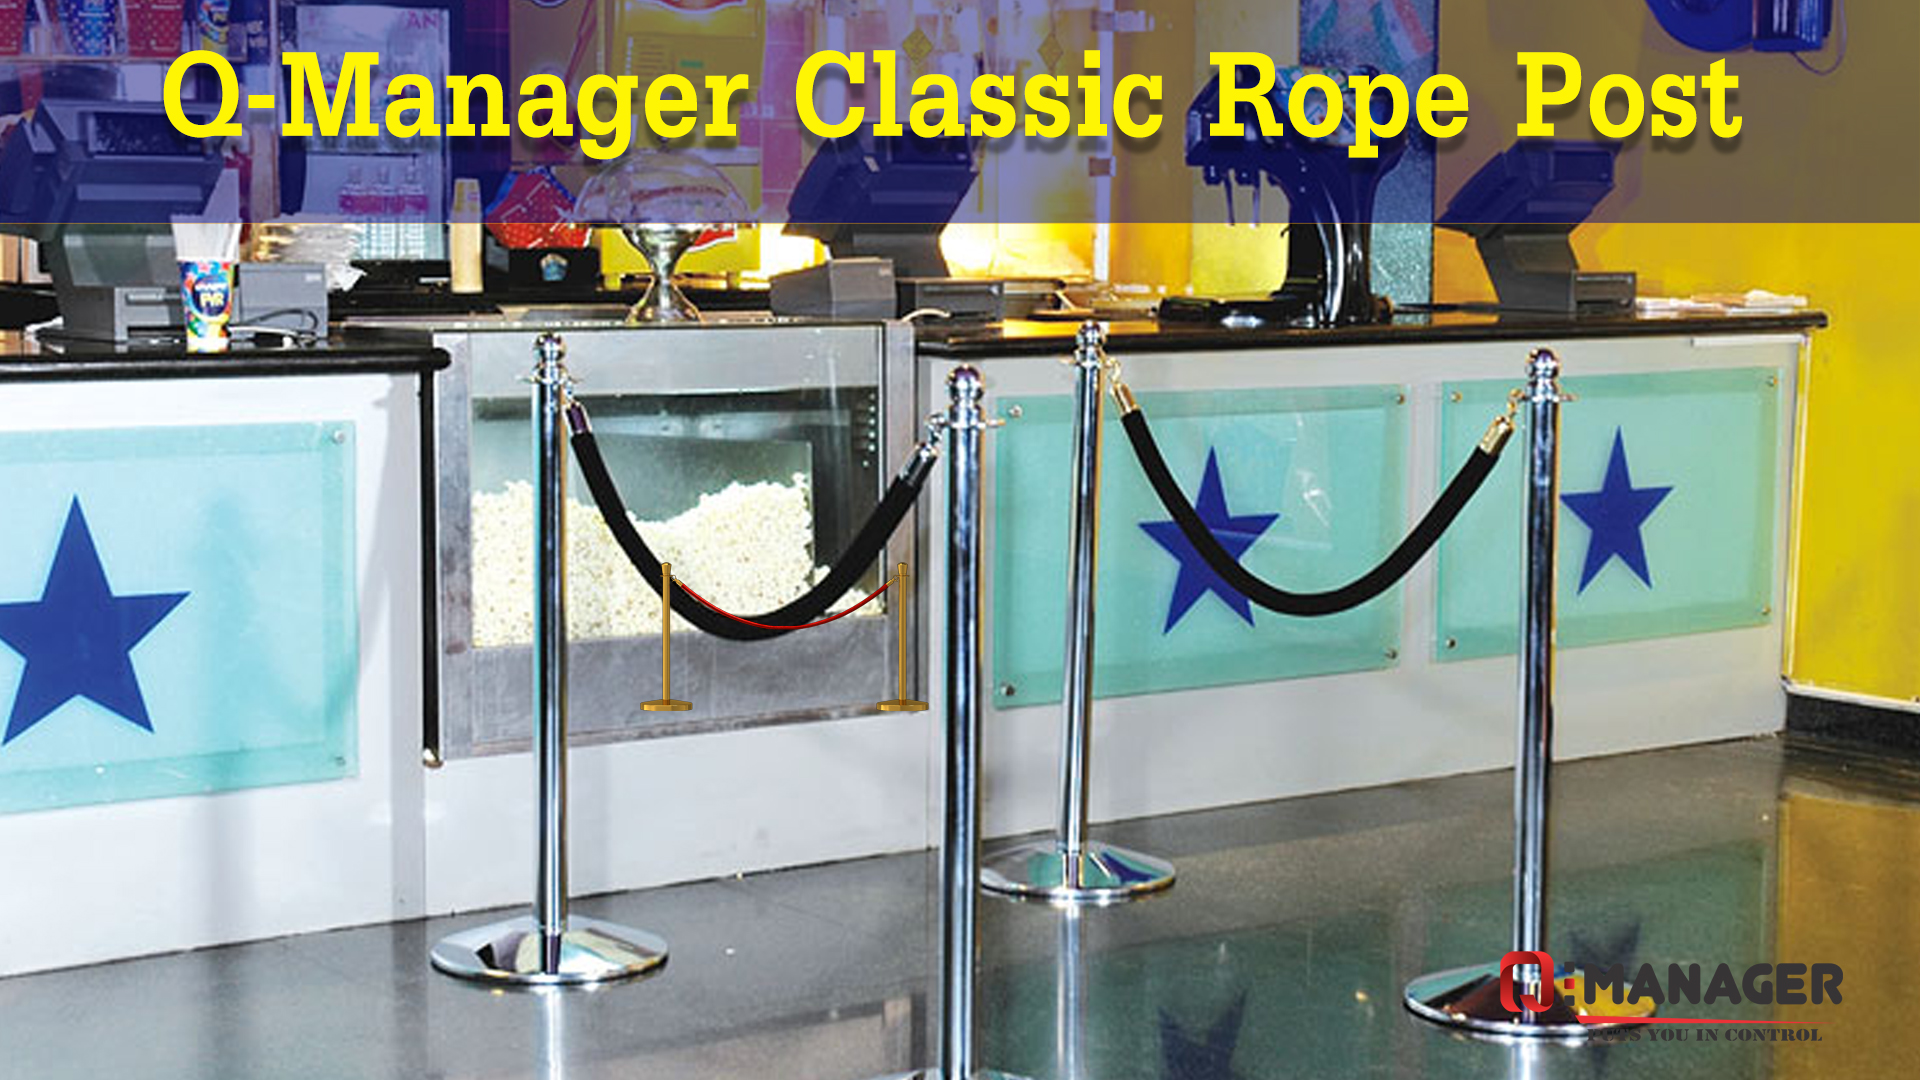 Q-Manager Classic Rope Post